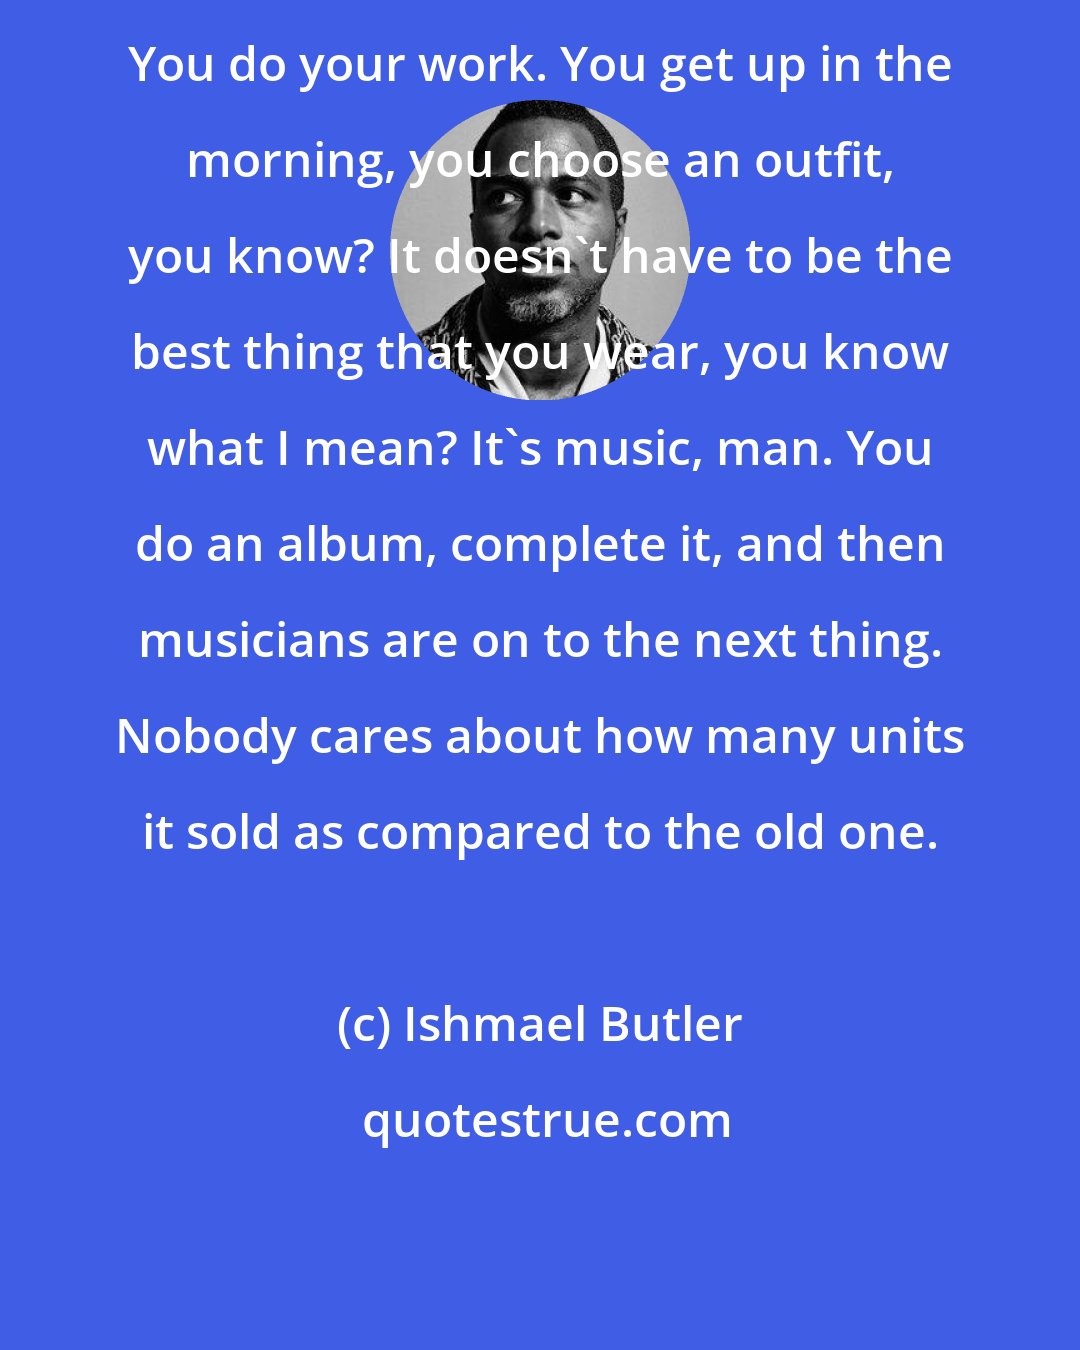 Ishmael Butler: You do your work. You get up in the morning, you choose an outfit, you know? It doesn't have to be the best thing that you wear, you know what I mean? It's music, man. You do an album, complete it, and then musicians are on to the next thing. Nobody cares about how many units it sold as compared to the old one.